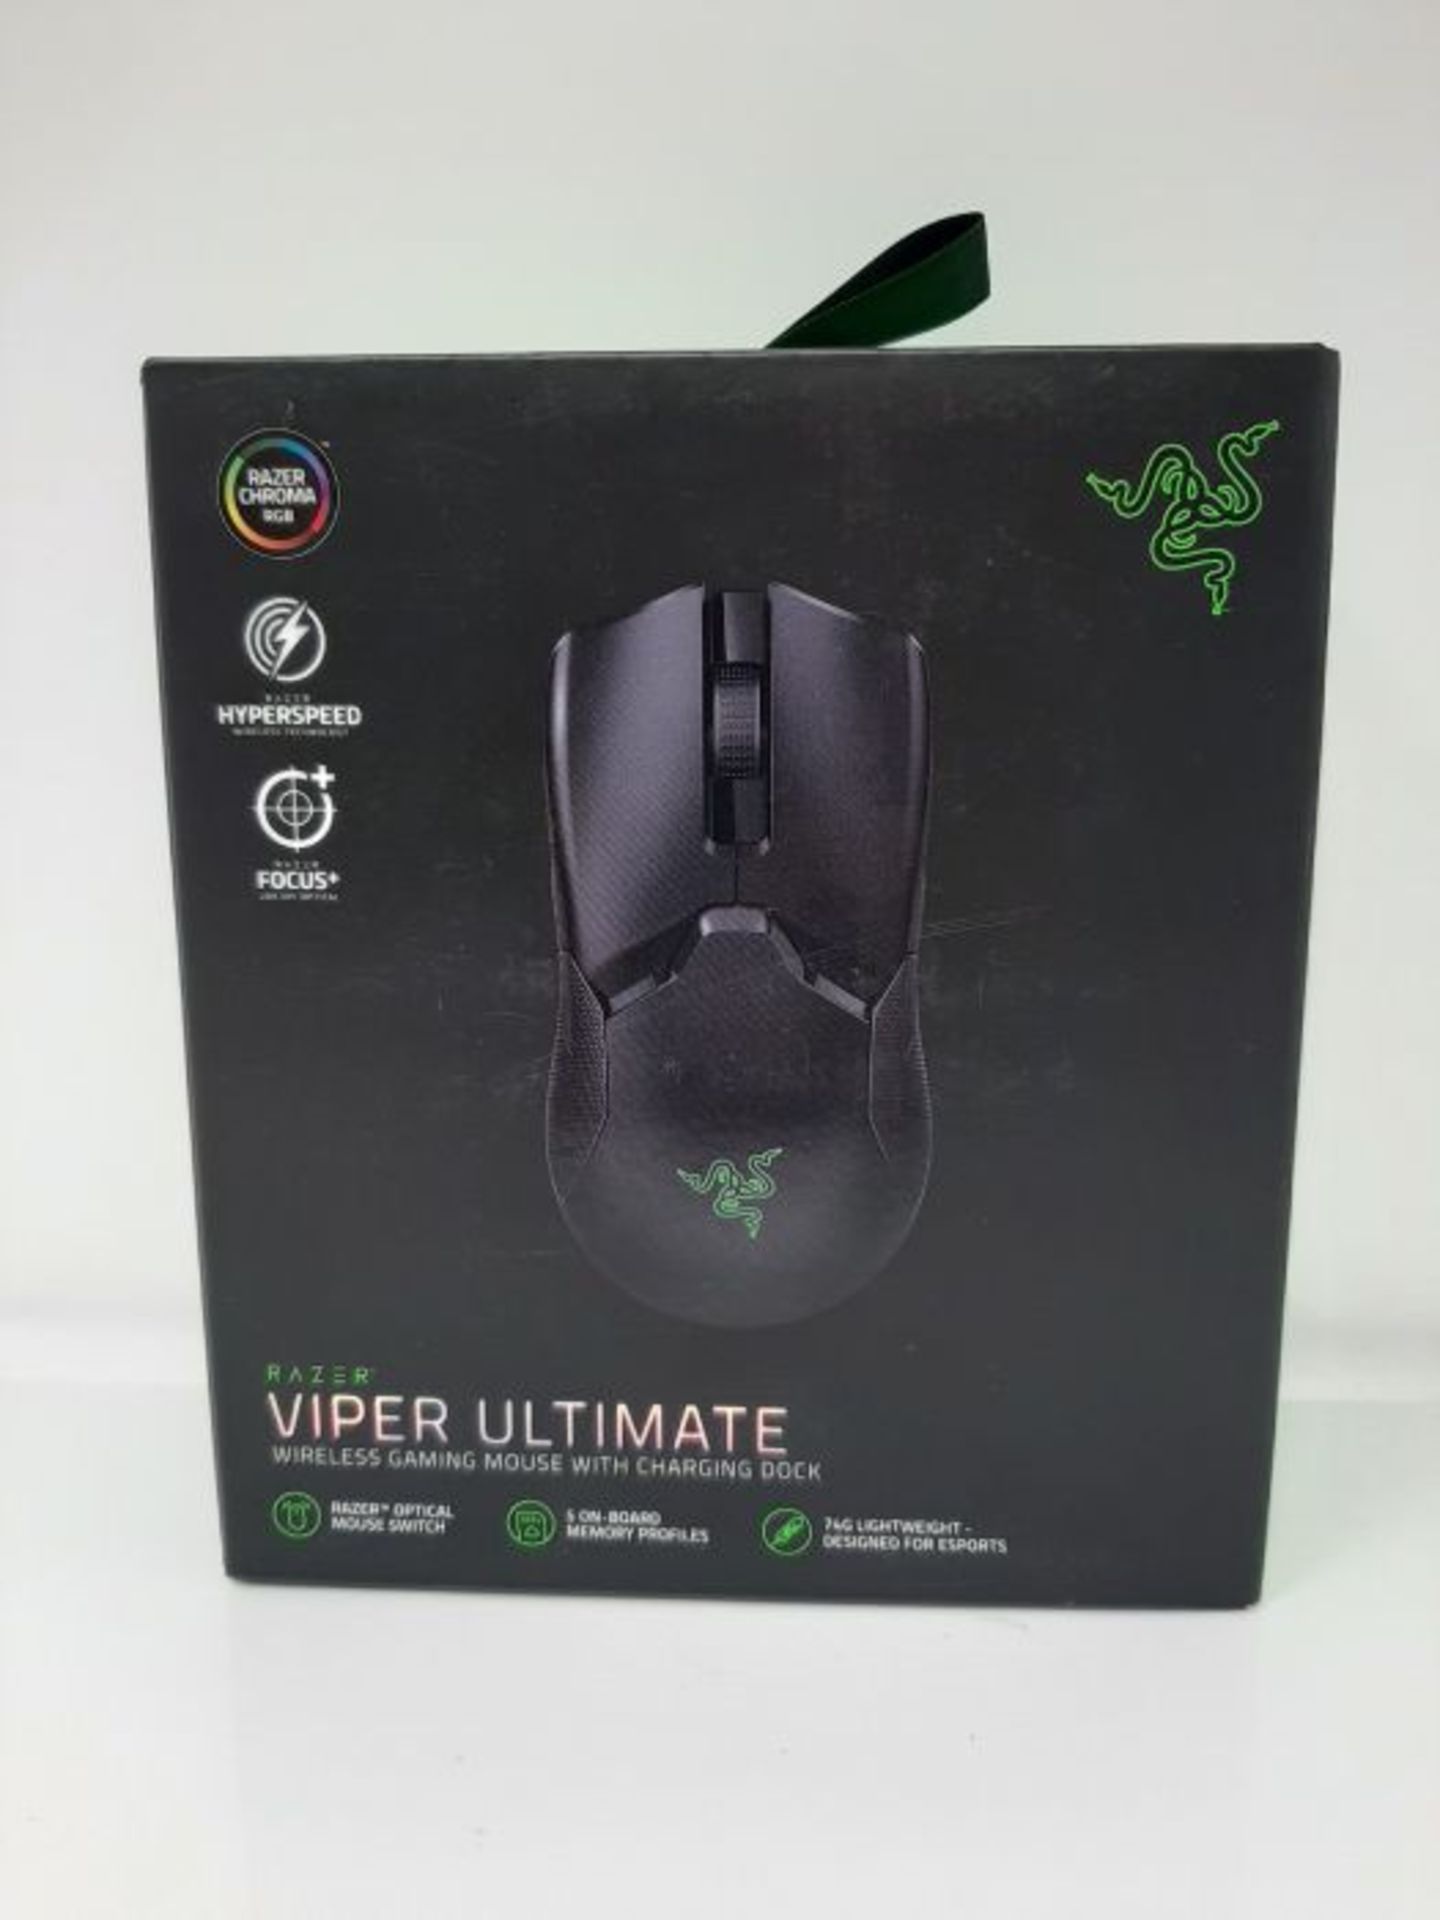 RRP £109.00 [INCOMPLETE] Razer Viper Ultimate Ambidextrous Gaming Mouse with Charging Dock - Black - Image 2 of 3